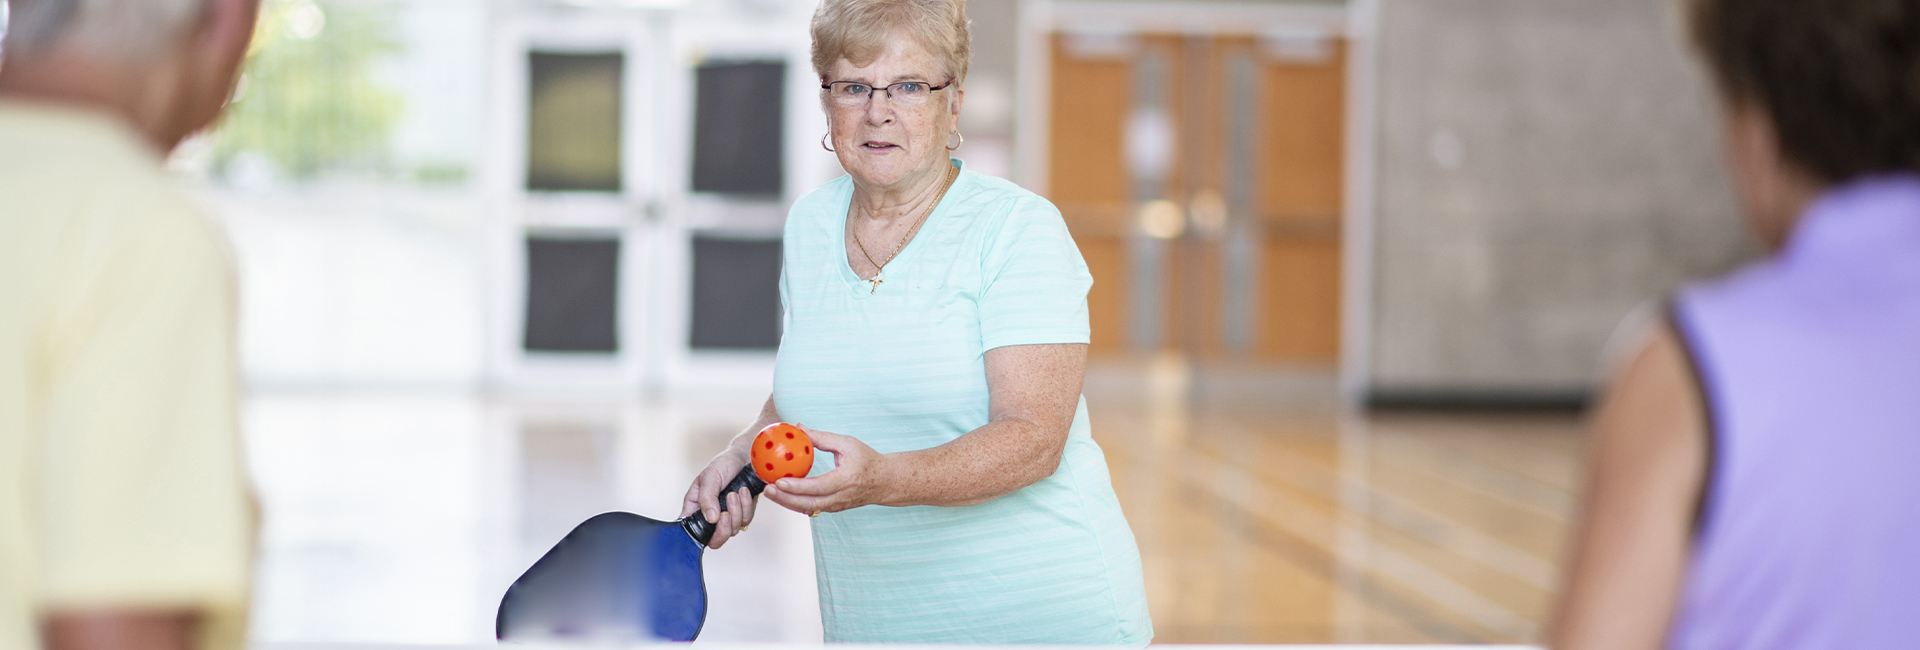 older people playing pickleball